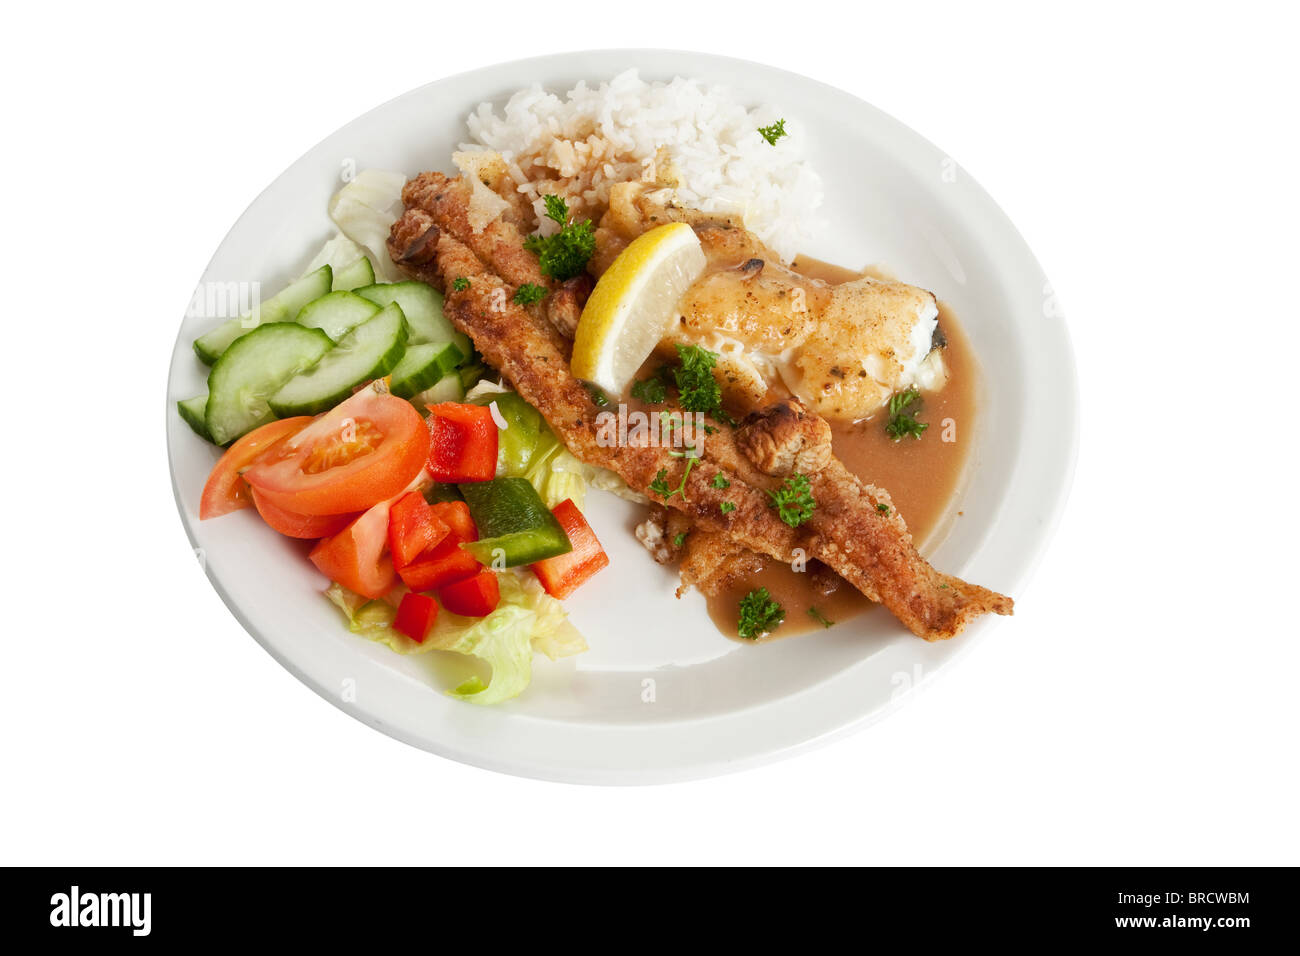 A dish of fried fish and rice with the recomended amount of food for an average sized person. Stock Photo